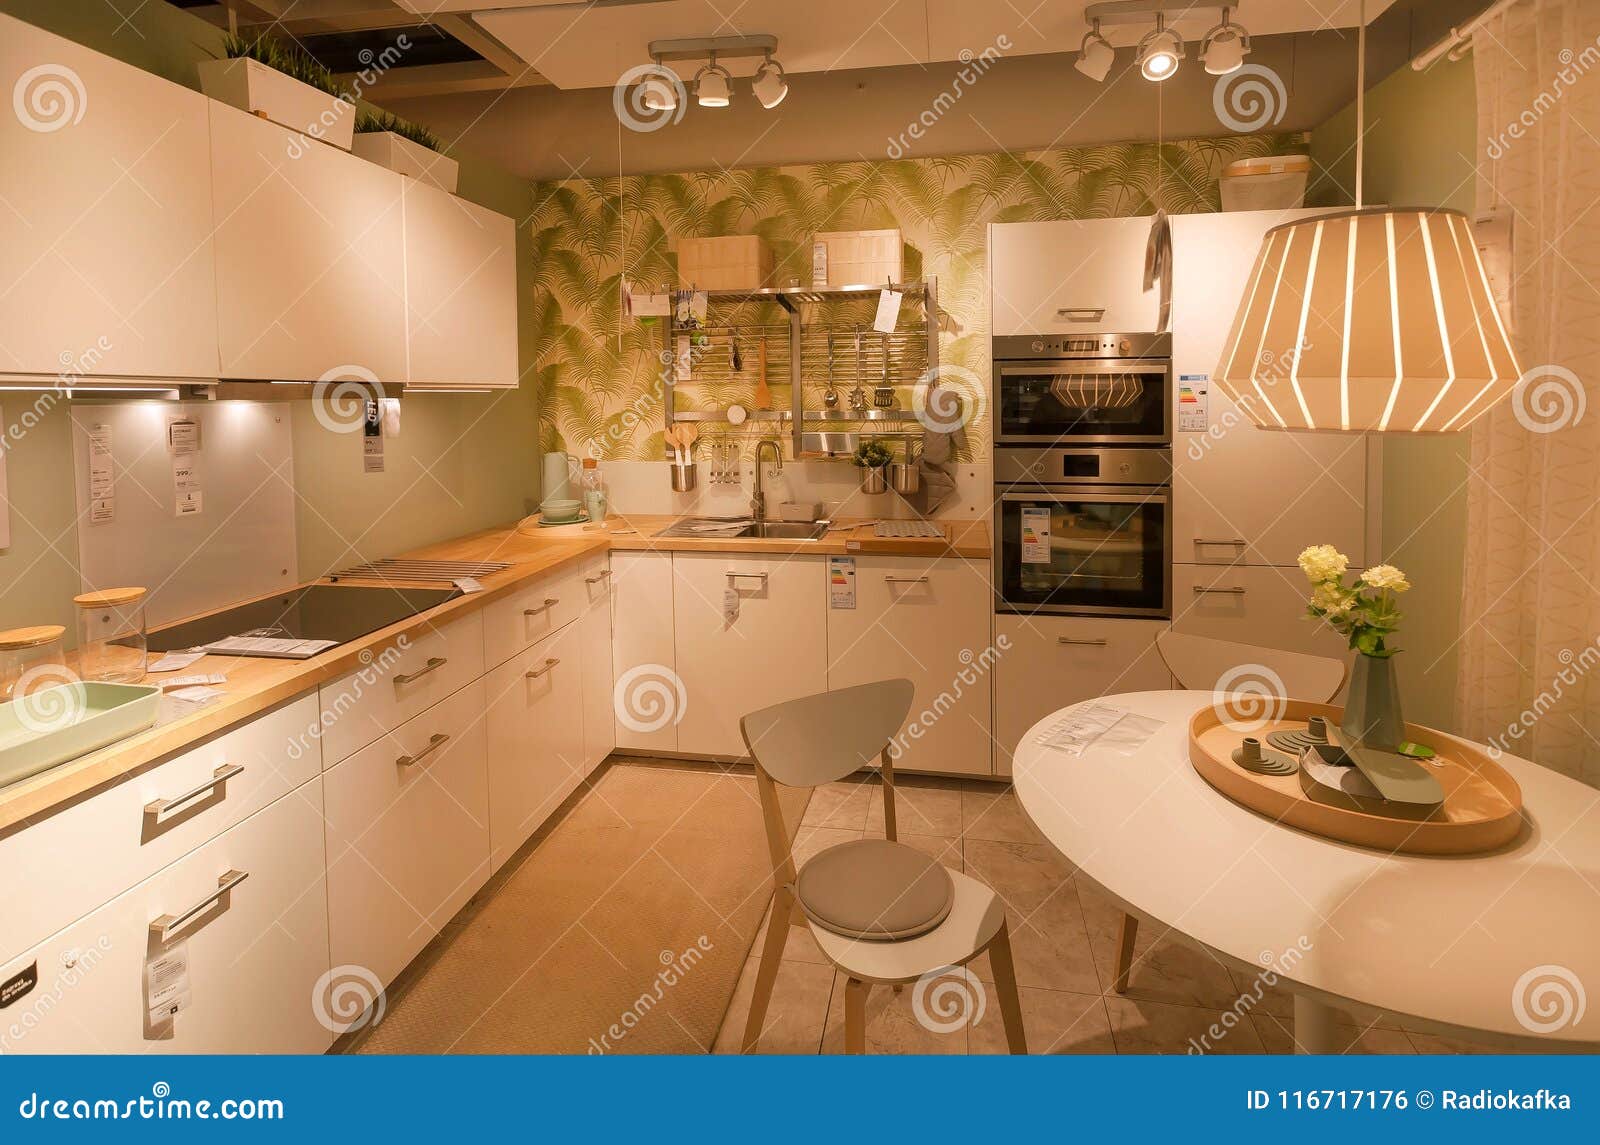 Modern Kitchen With Oven And Fridge In Ikea Store With Furniture